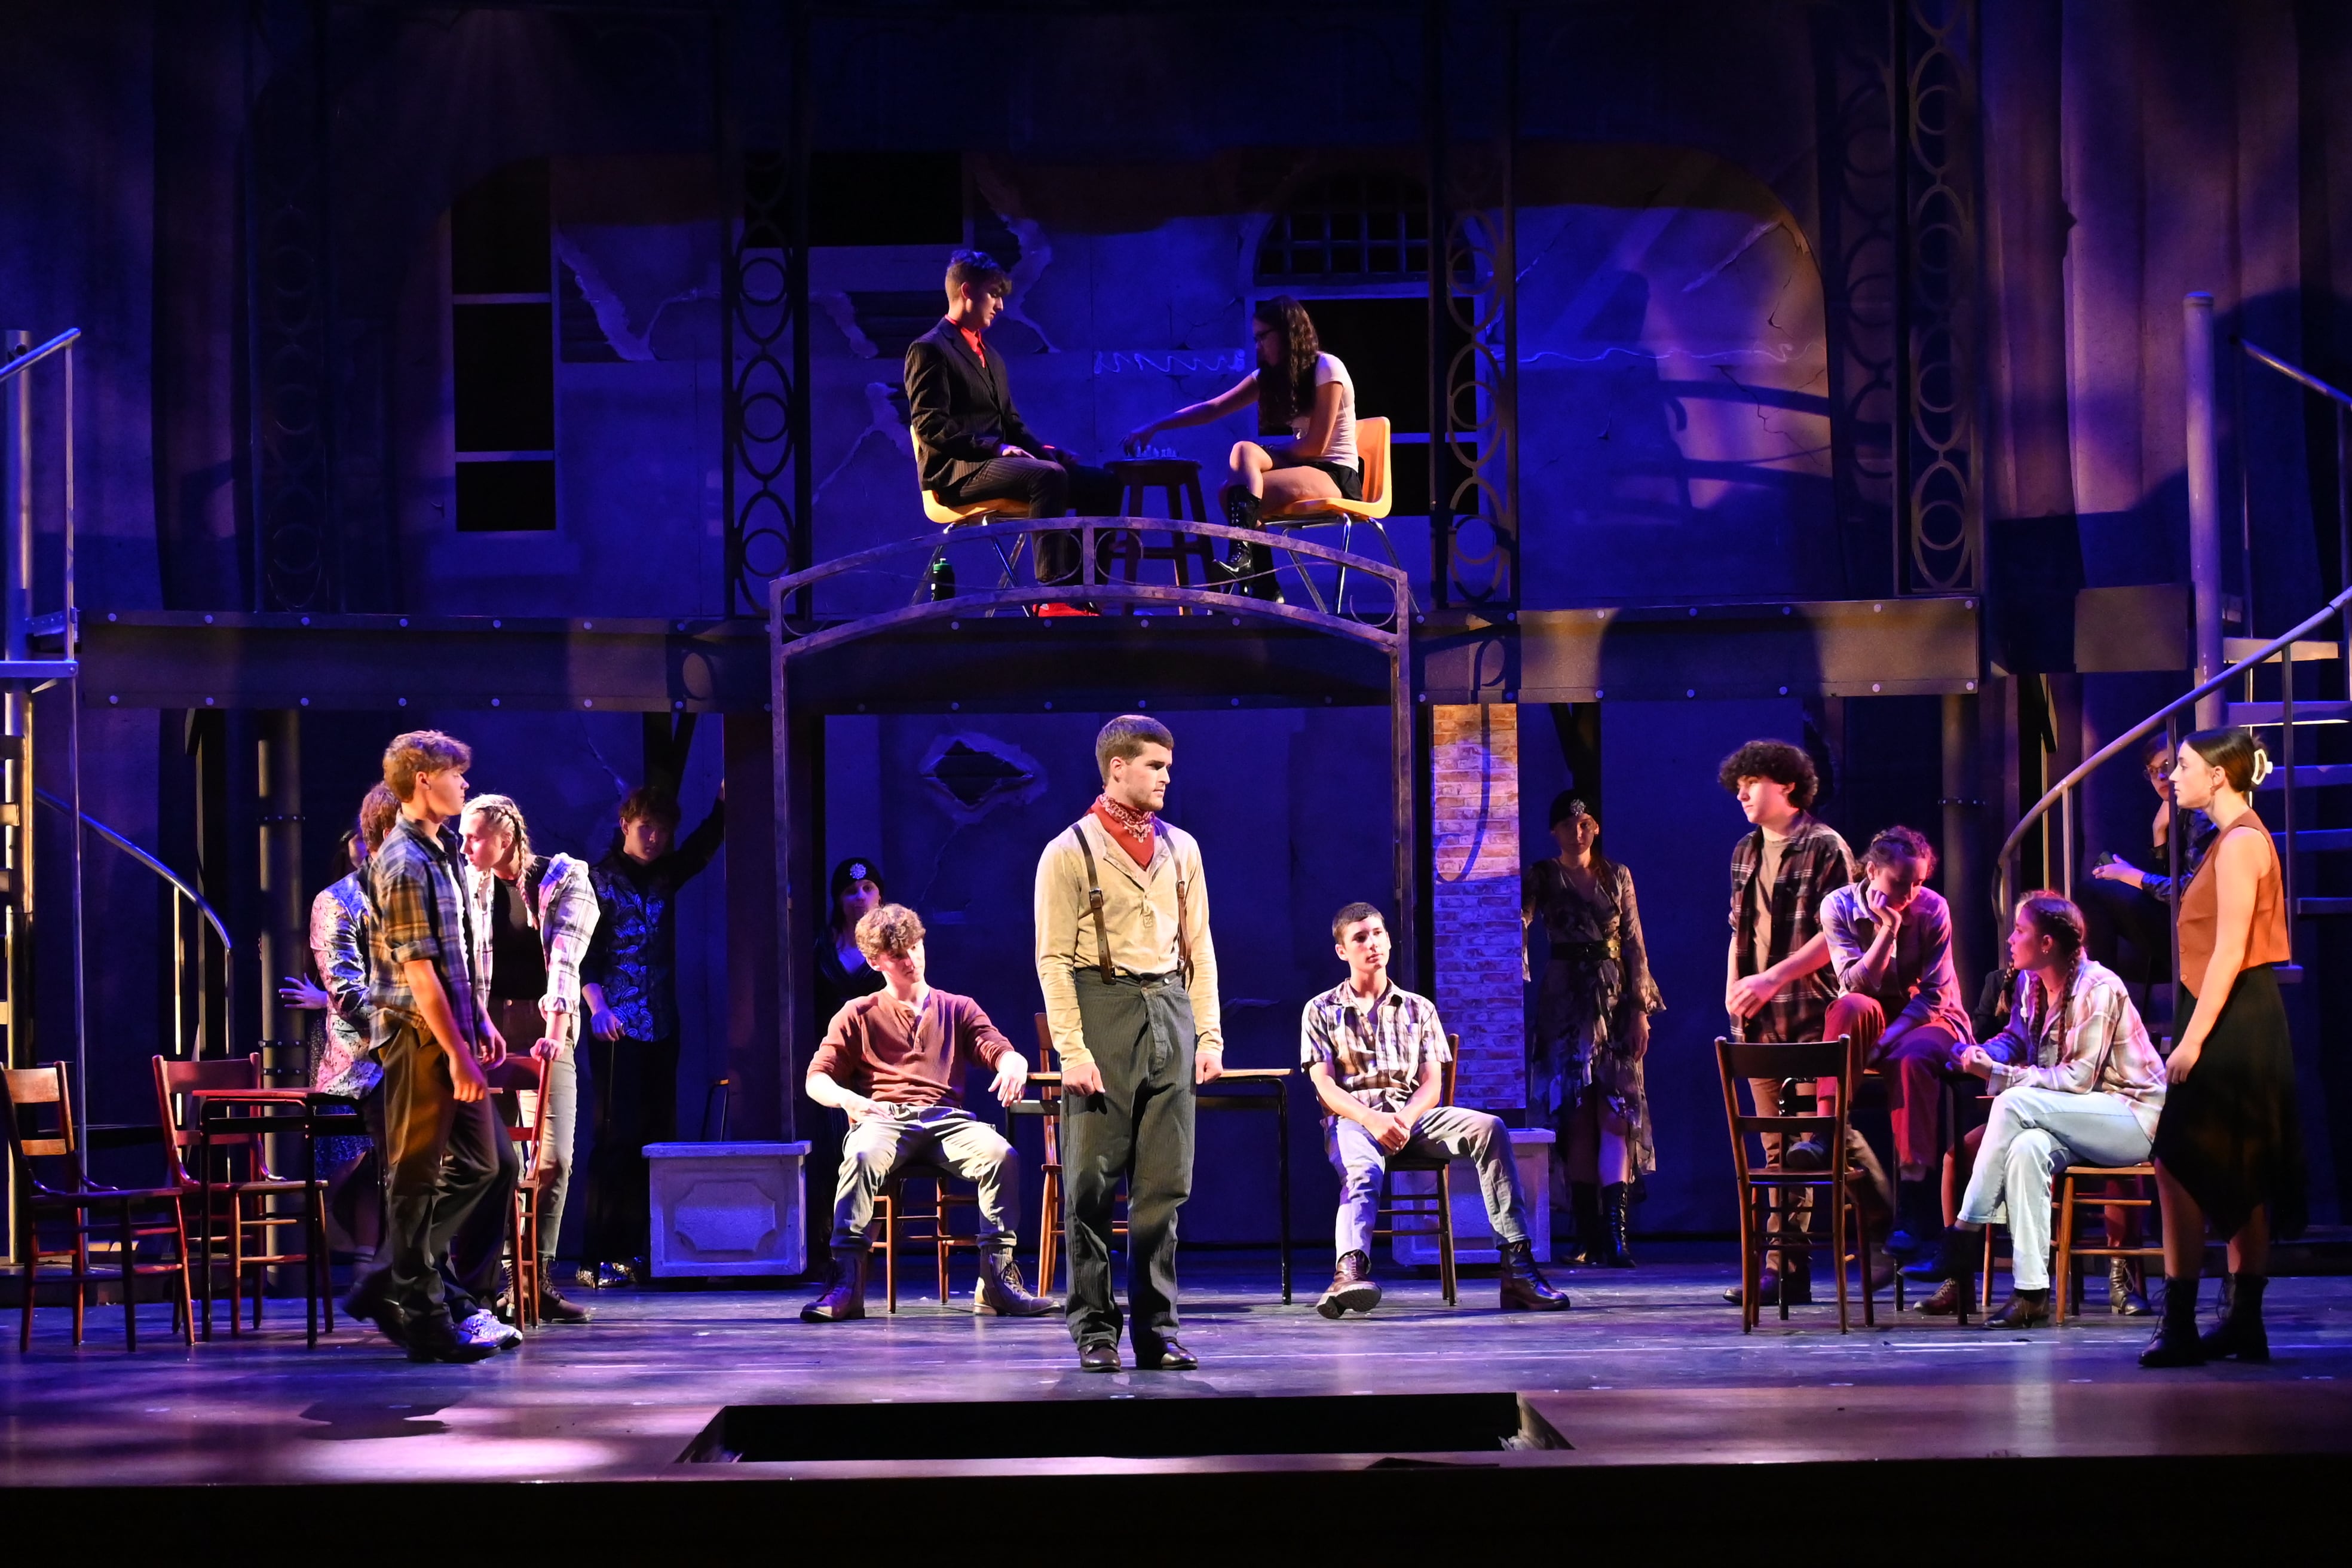 Orpheus, played by Stephen Byers, Jr., surrounded by the rest of the cast of Hadestown, including Elaina Patten on the far right, who plays Eurydice.